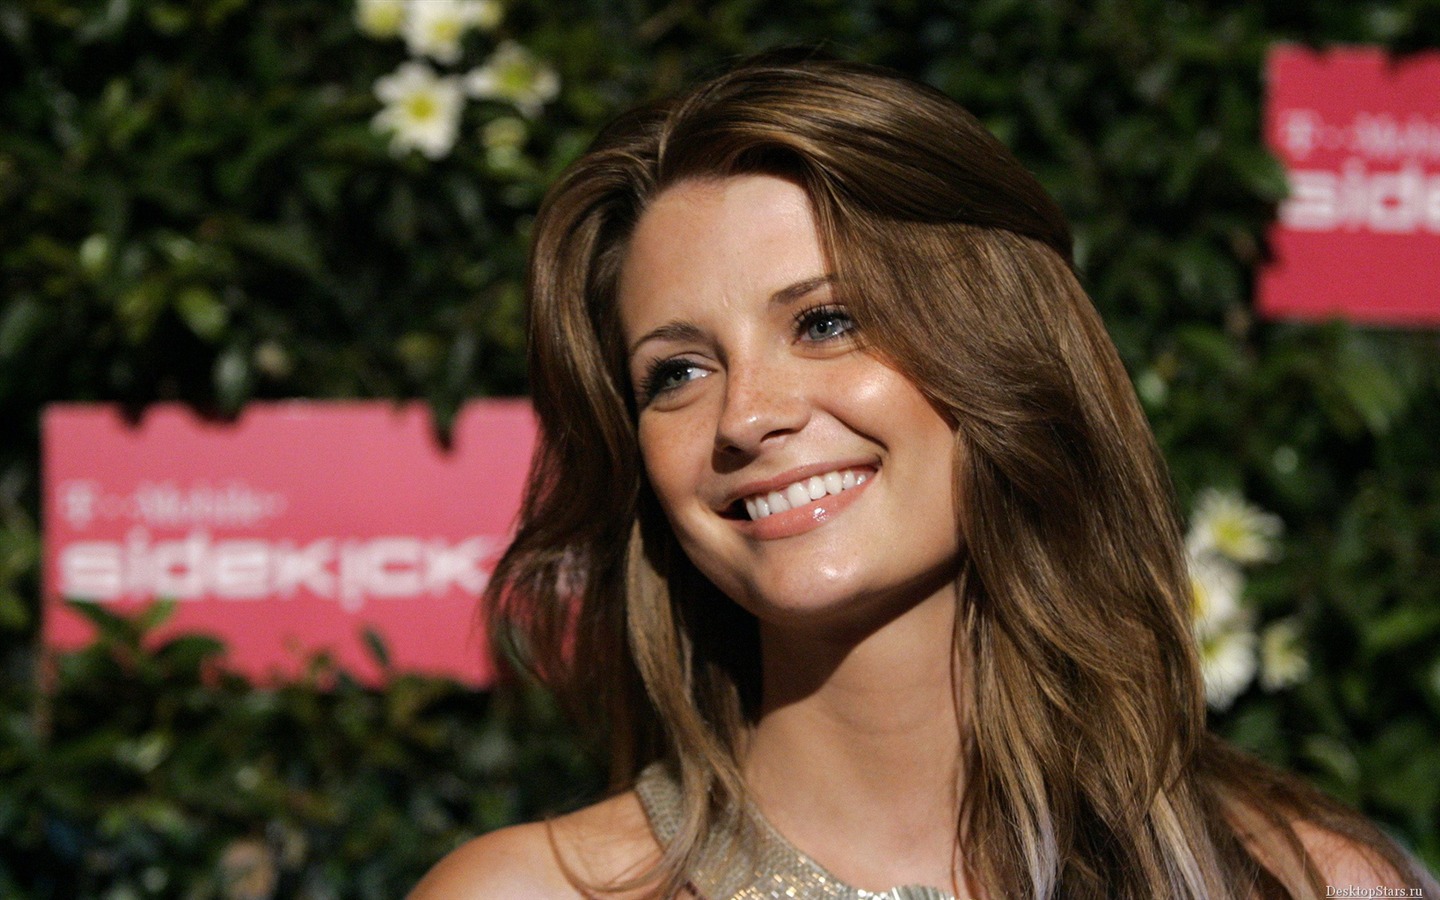 Mischa Barton #022 - 1440x900 Wallpapers Pictures Photos Images